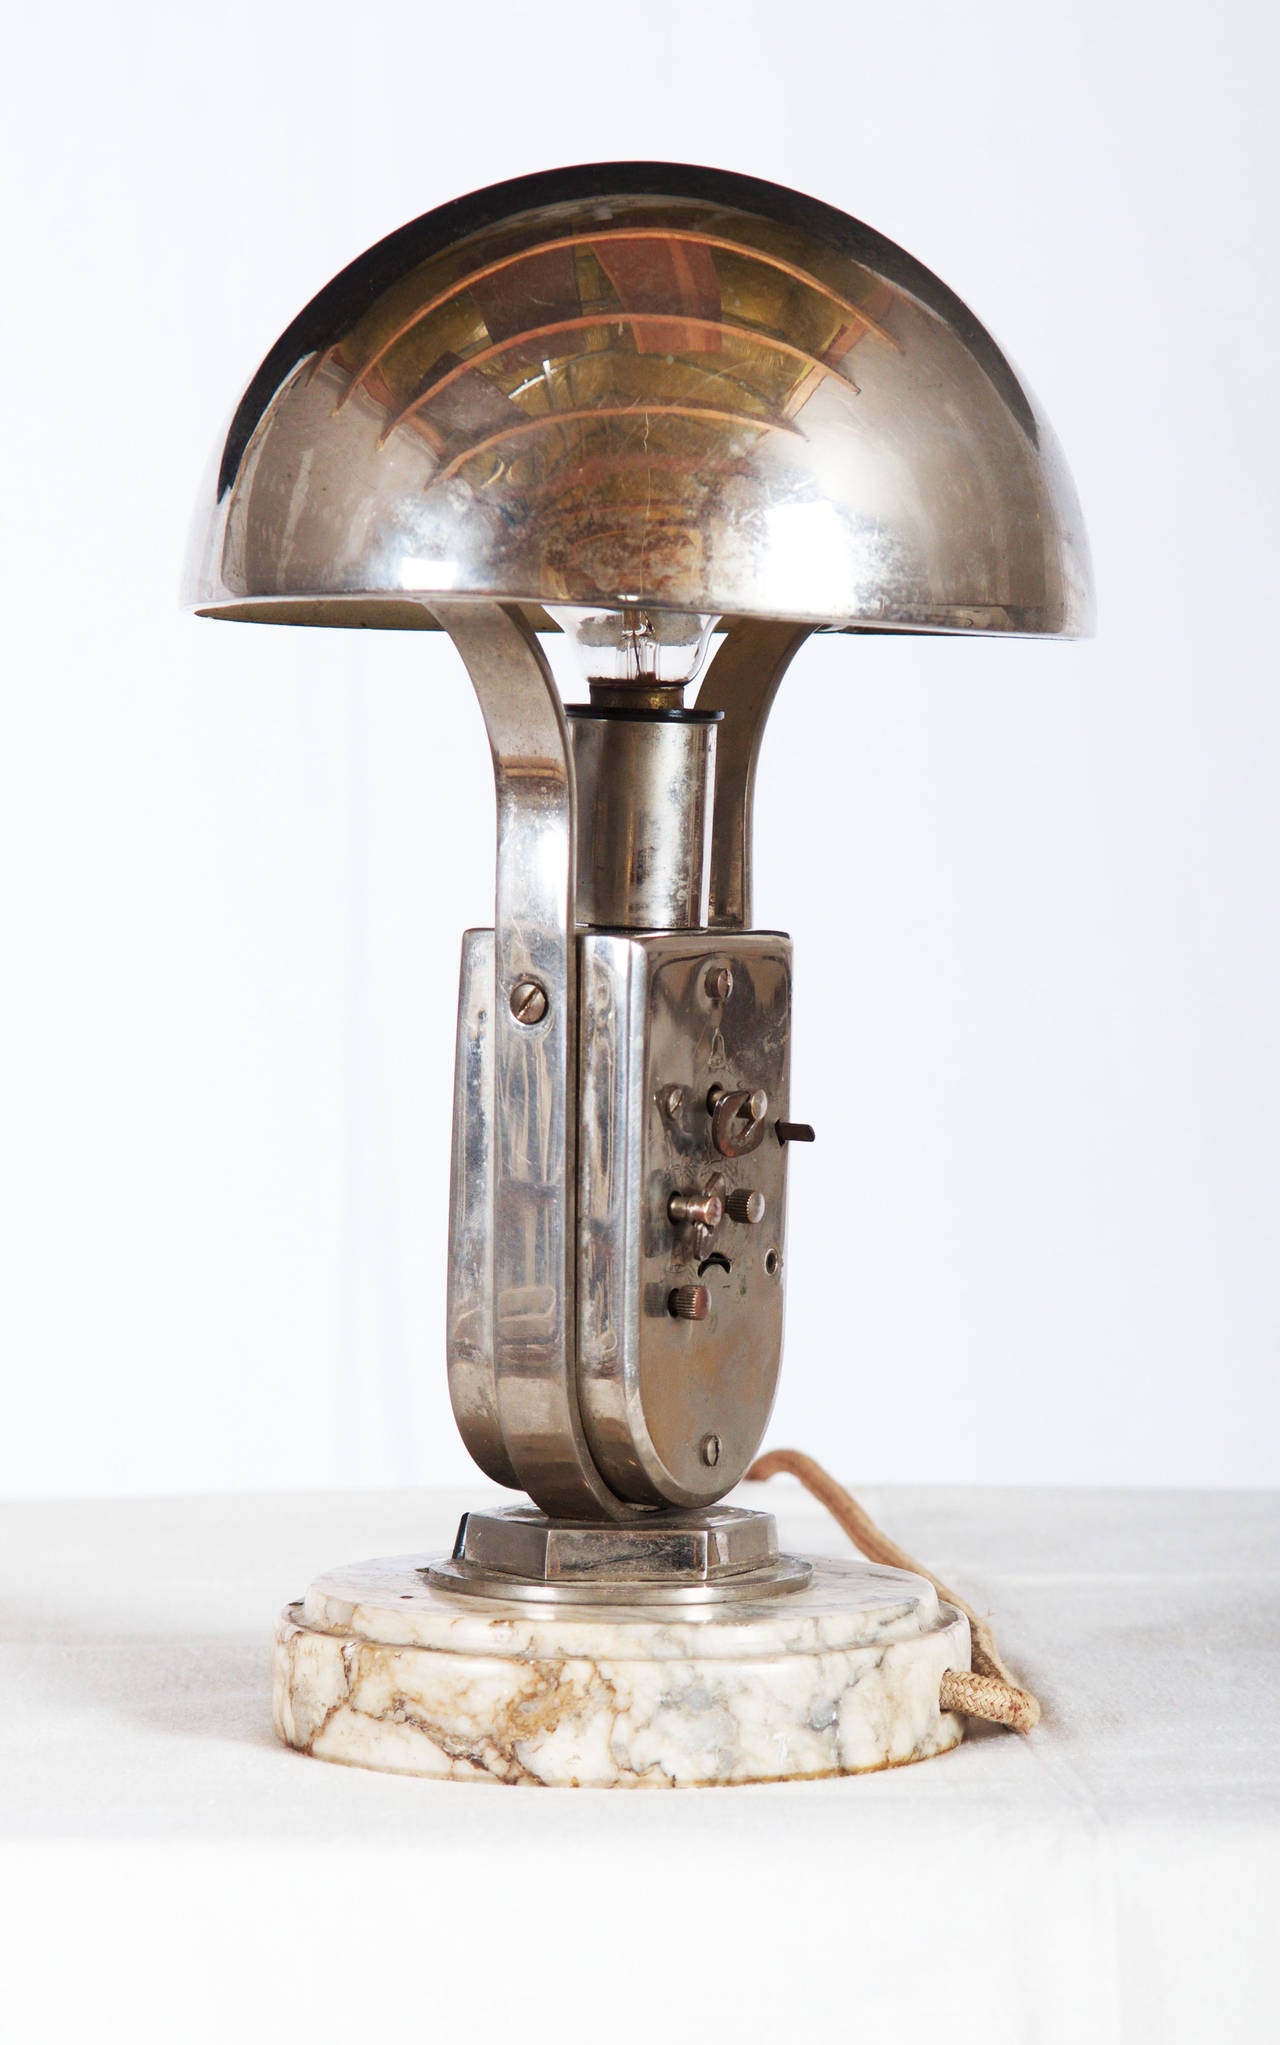 Art Deco Mofem Table Lamp with Integrated Alarm Clock Nickel-Plated 
Hungary about 1930s table lamp with integrated alarm clock. 
Metal construction nickel-plated with very nice marble base and an adjustable hemispheric lampshade. 
Fully working.